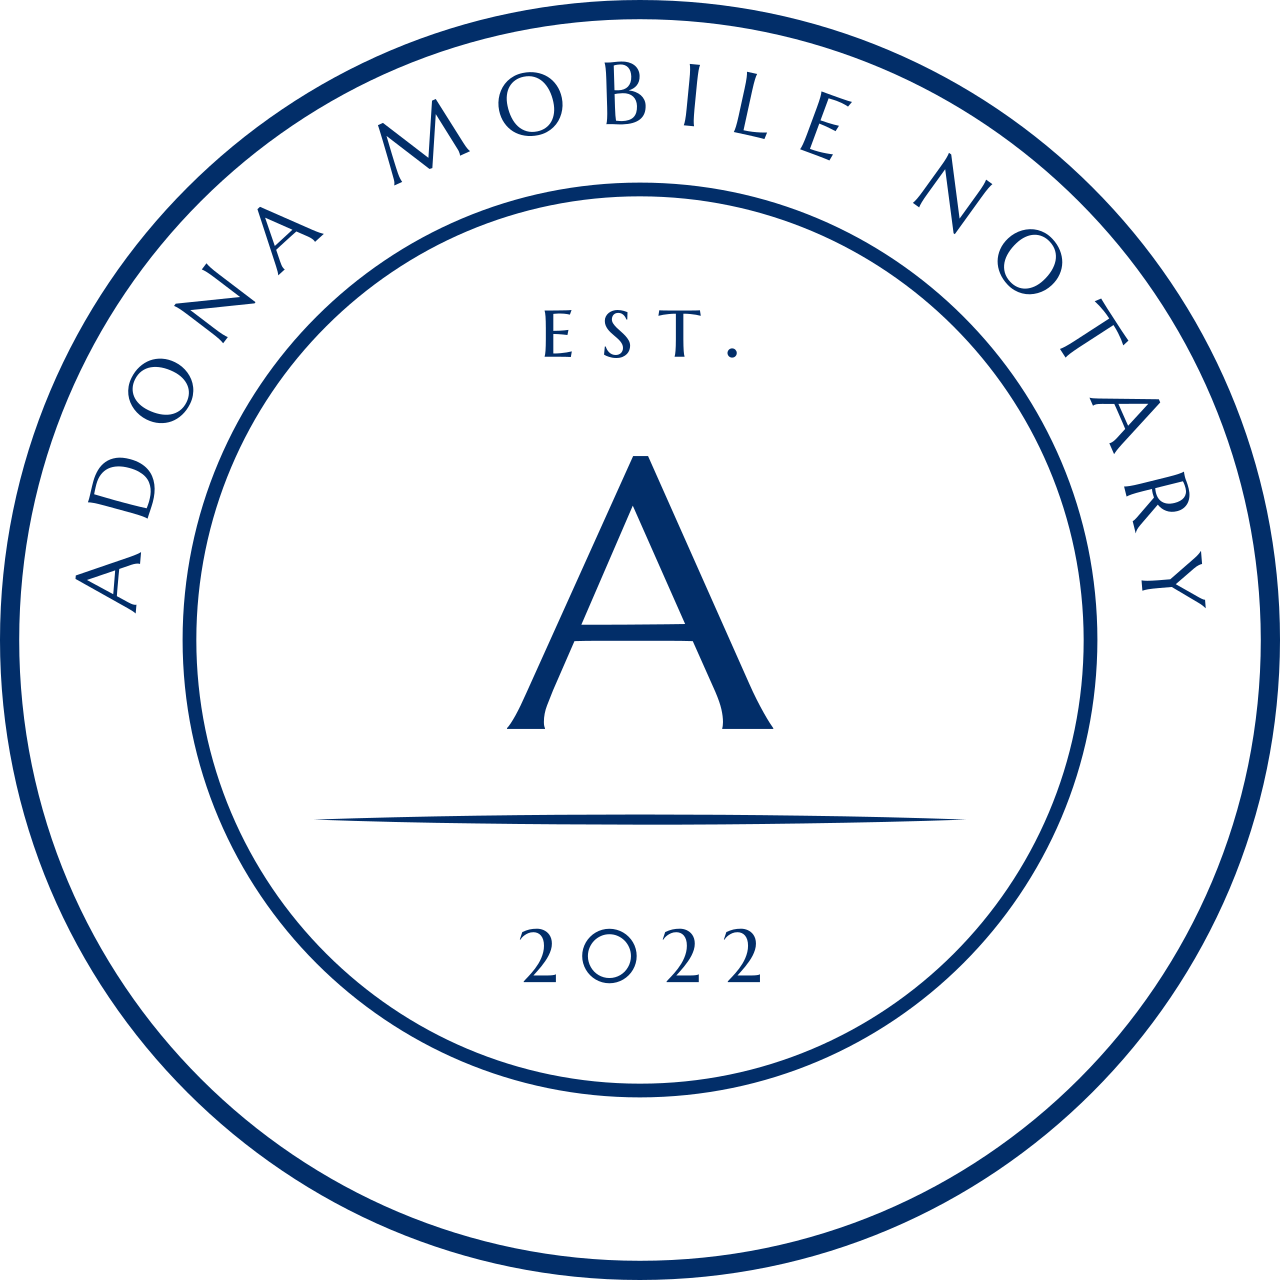 Adona Mobile Notary's web page